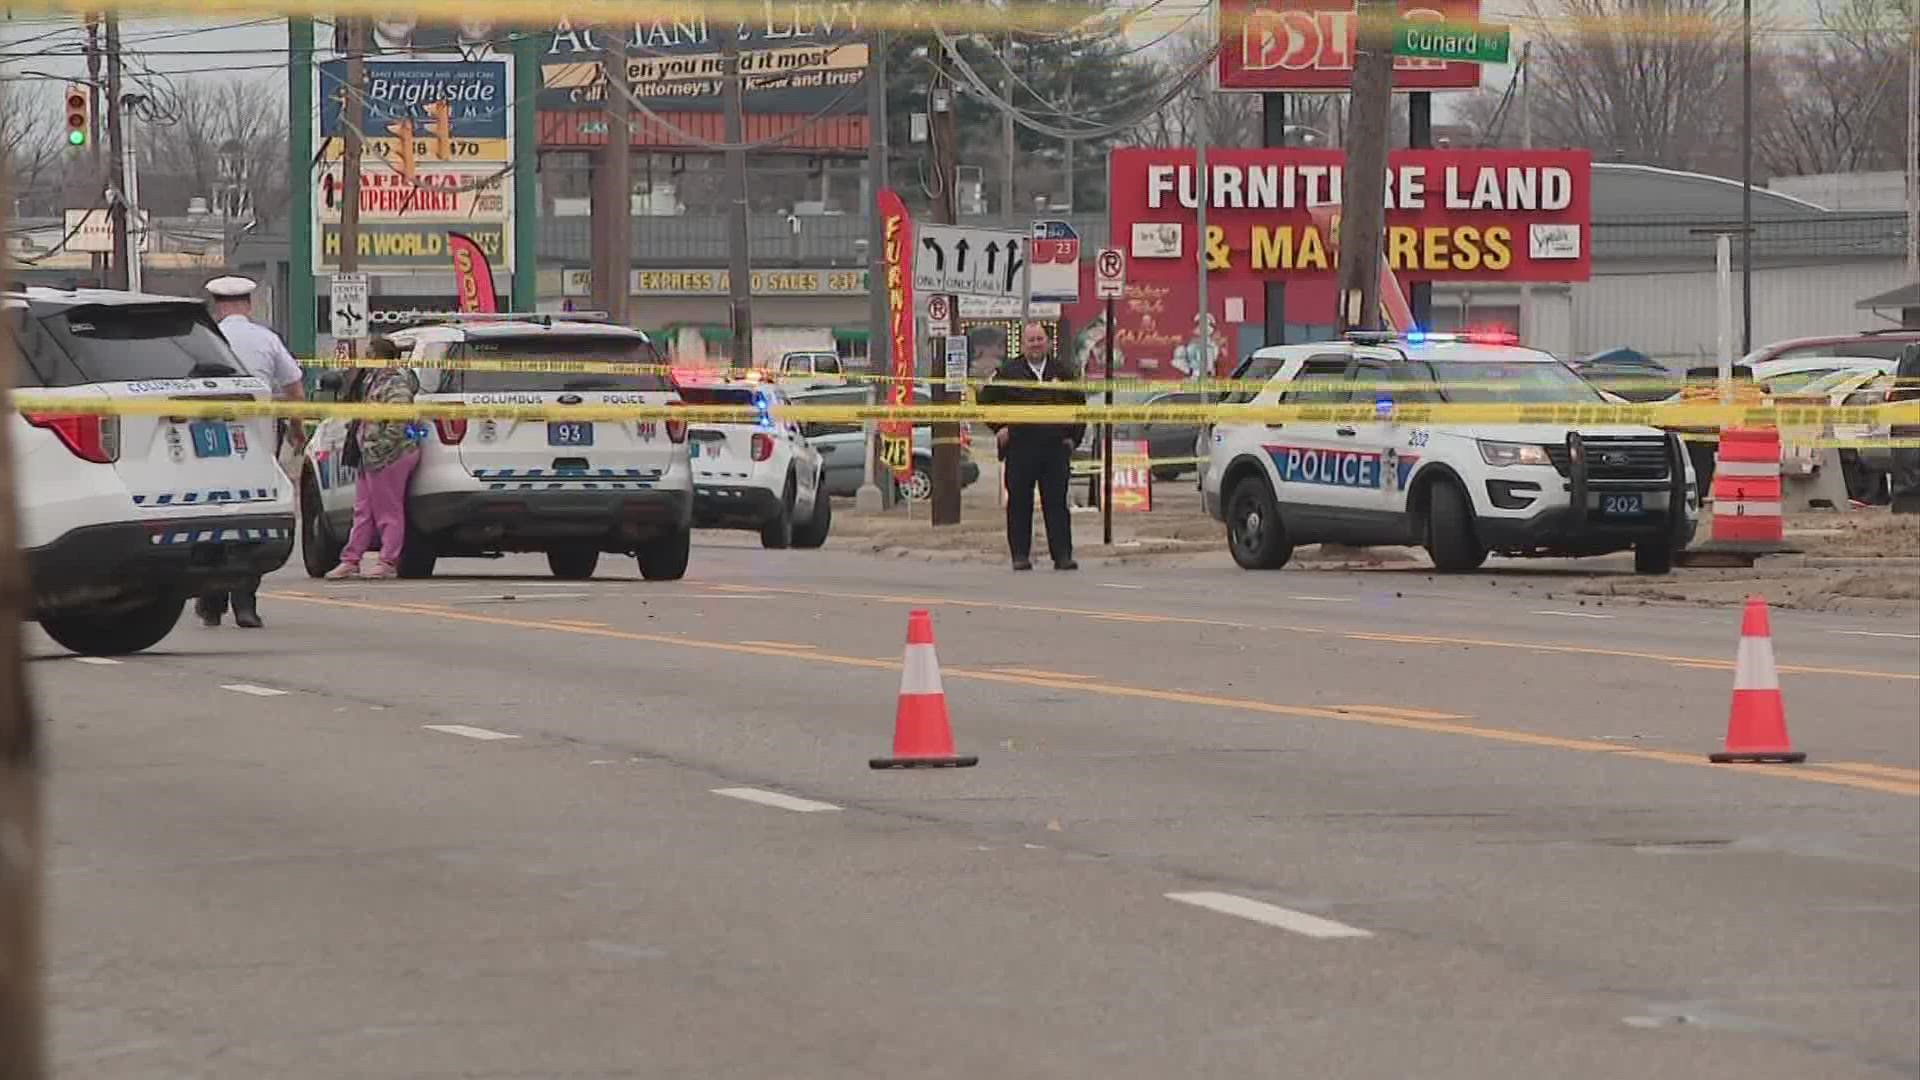 Police said the officer shot the suspect in the 3300 block of East Livingston Avenue just before 4:30 p.m.